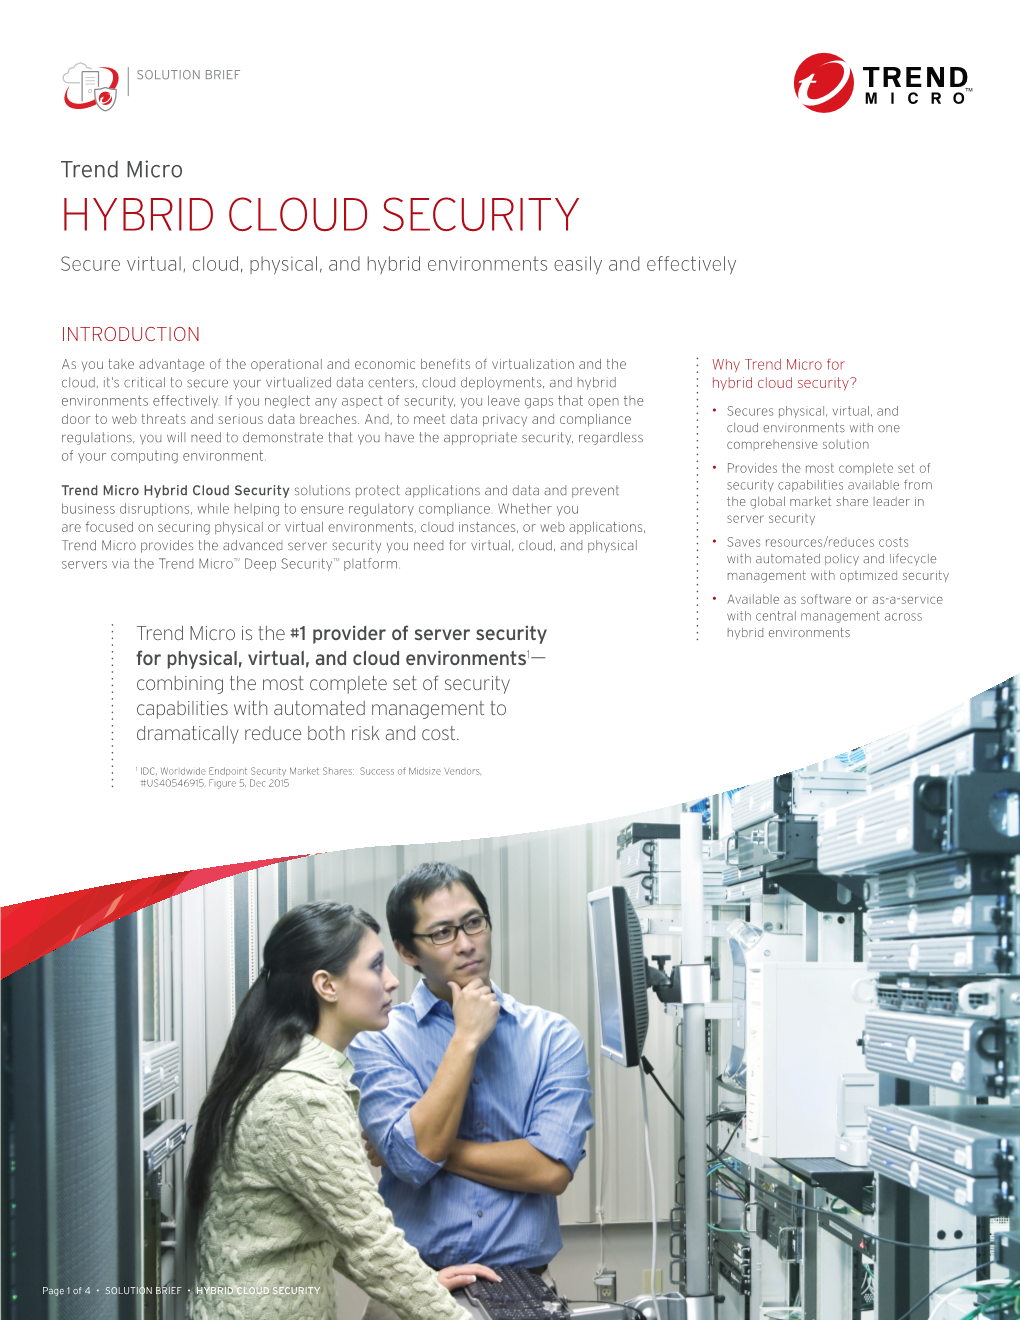 HYBRID CLOUD SECURITY Secure Virtual, Cloud, Physical, and Hybrid Environments Easily and Effectively